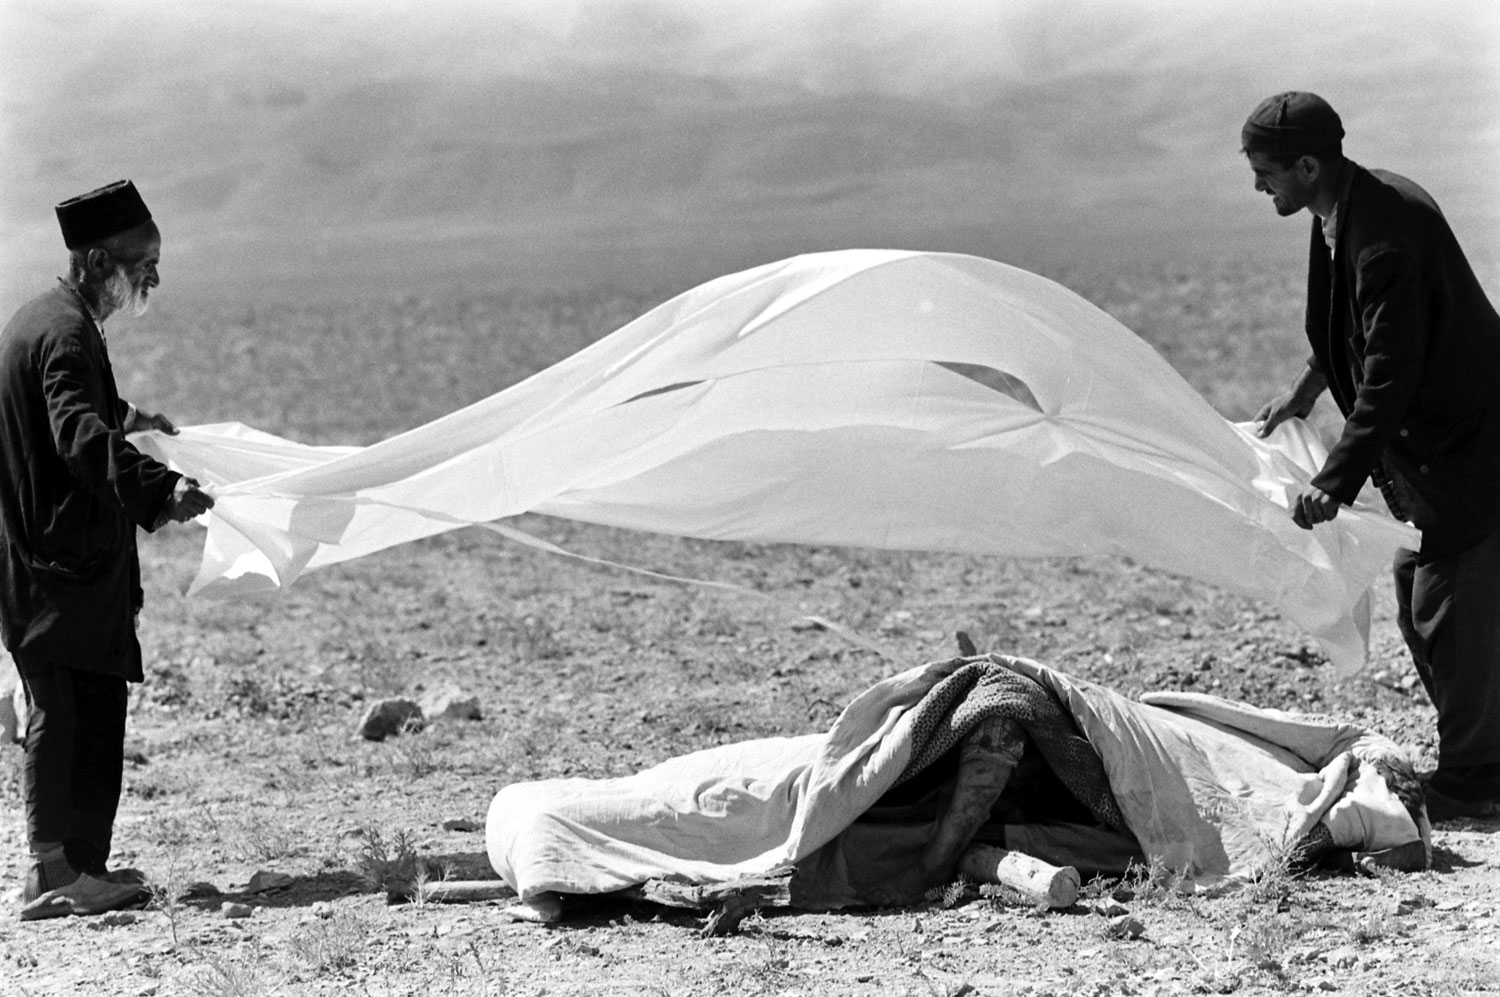 Aftermath of a September 1962 earthquake in northwestern Iran.